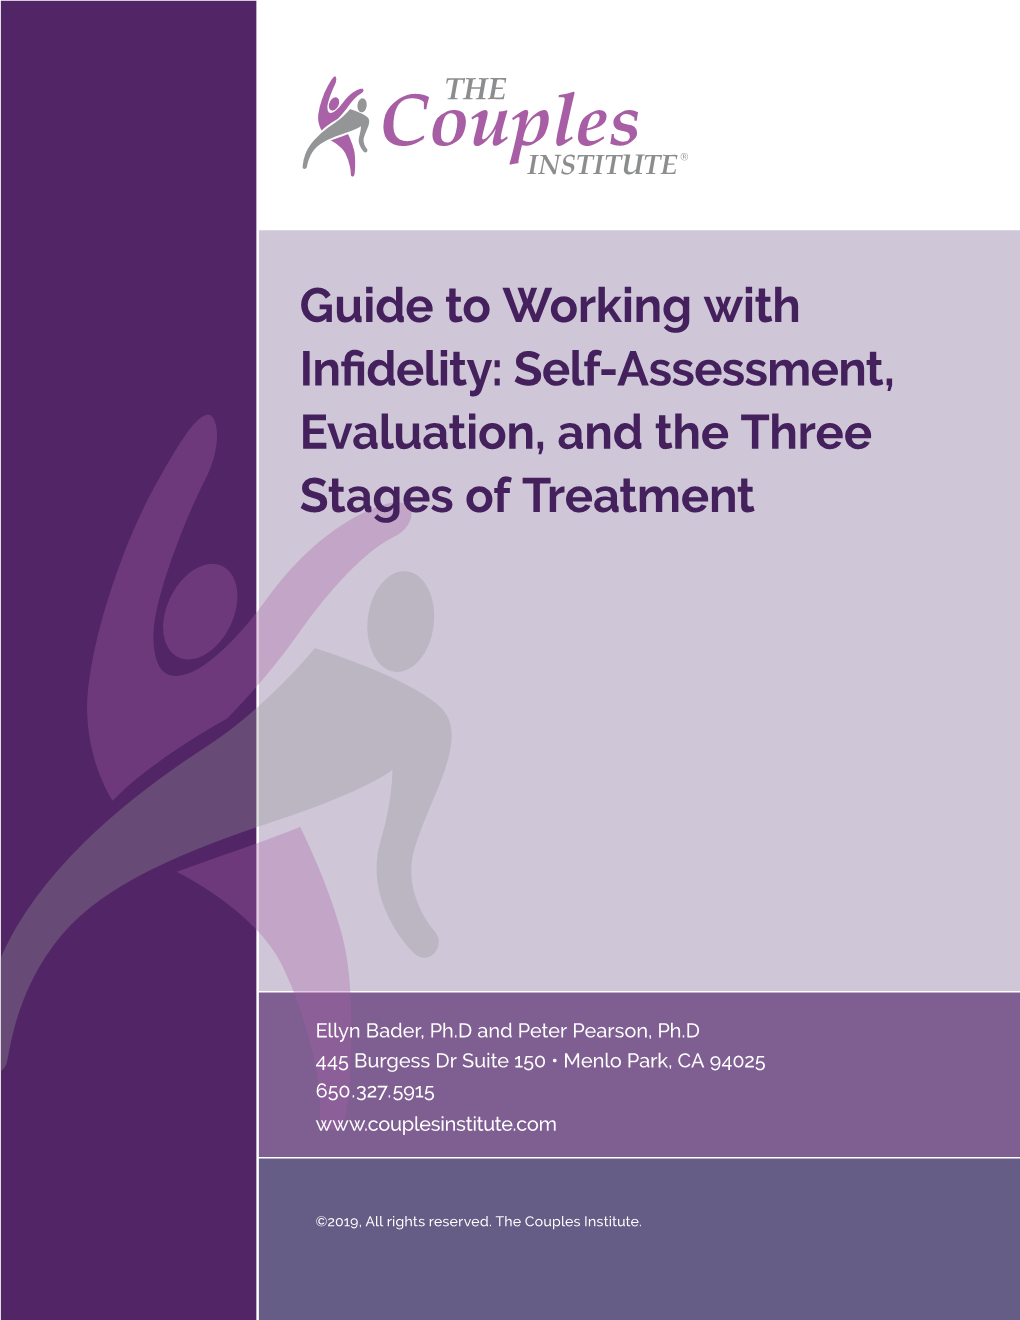 Guide To Working With Infidelity Self Assessment Evaluation And The Three Stages Of Treatment 4697